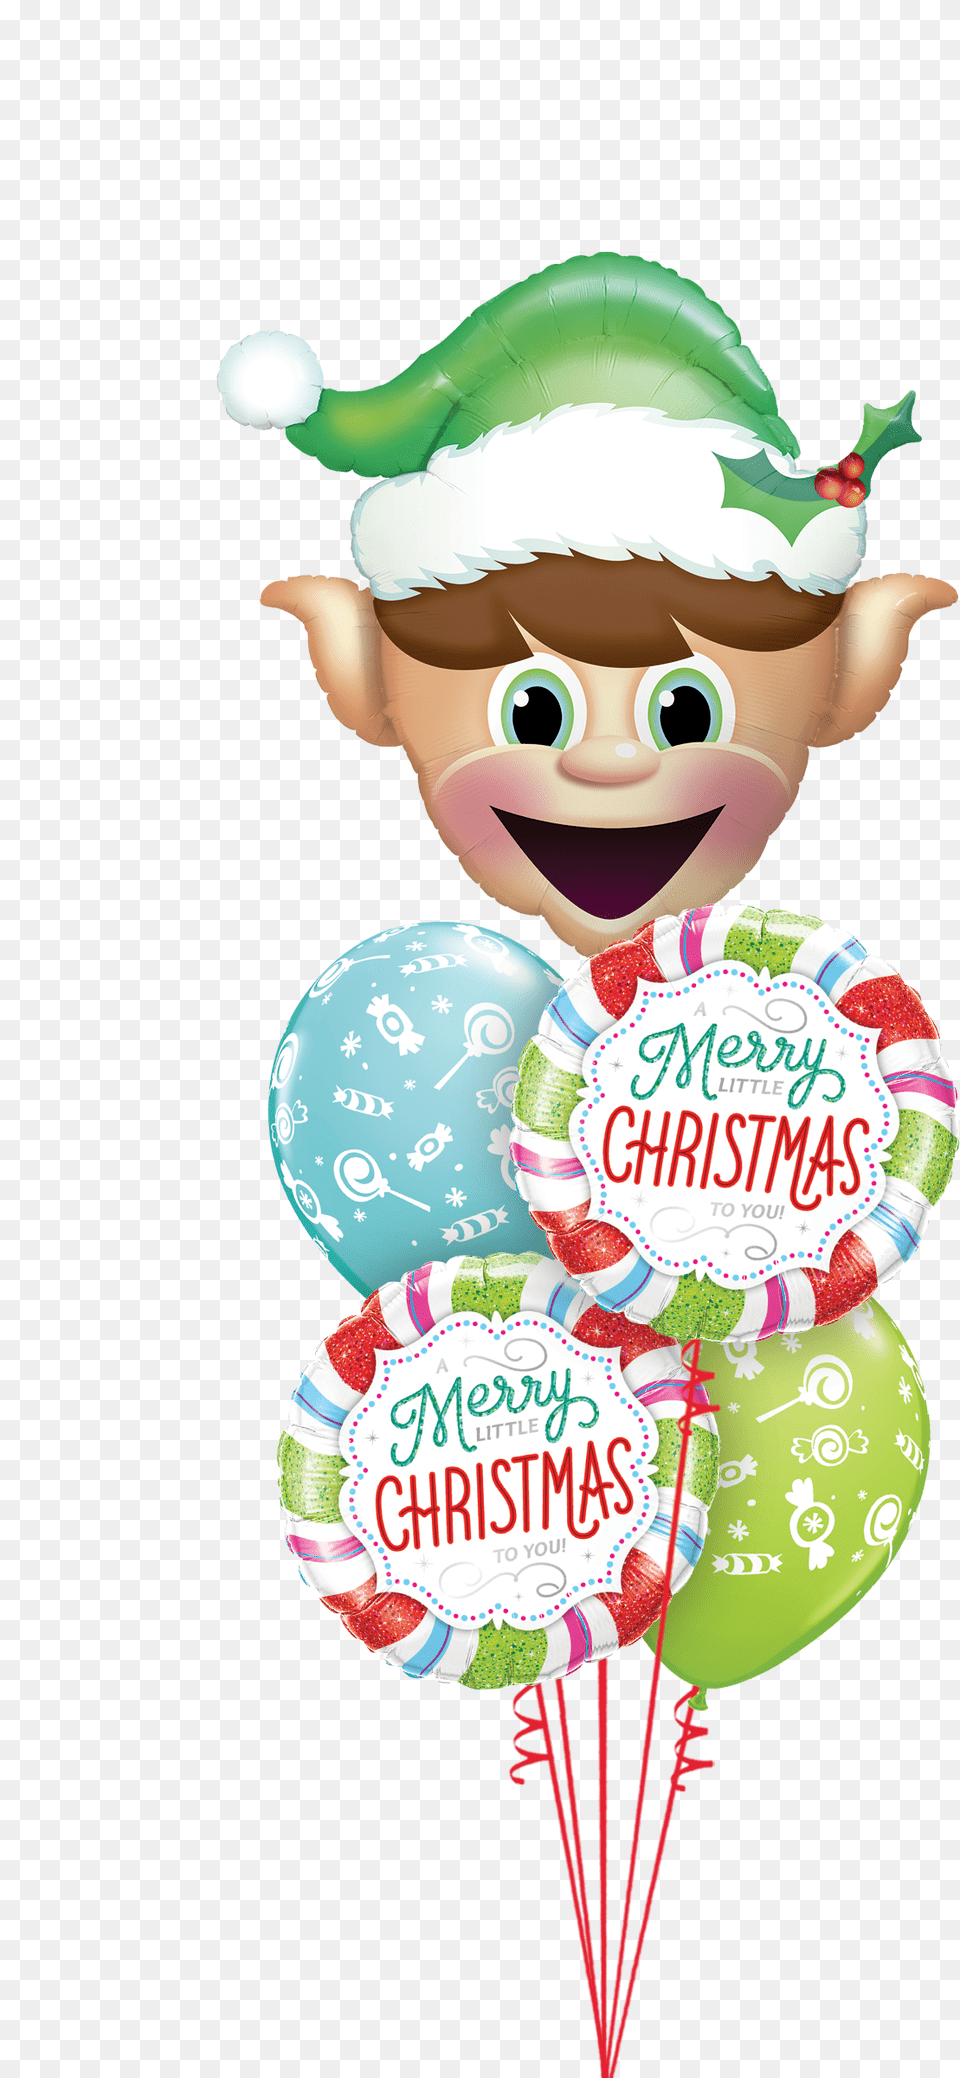 Merry Little Christmas To You Balloon Clipart Balloon, Baby, Person, Elf Png Image